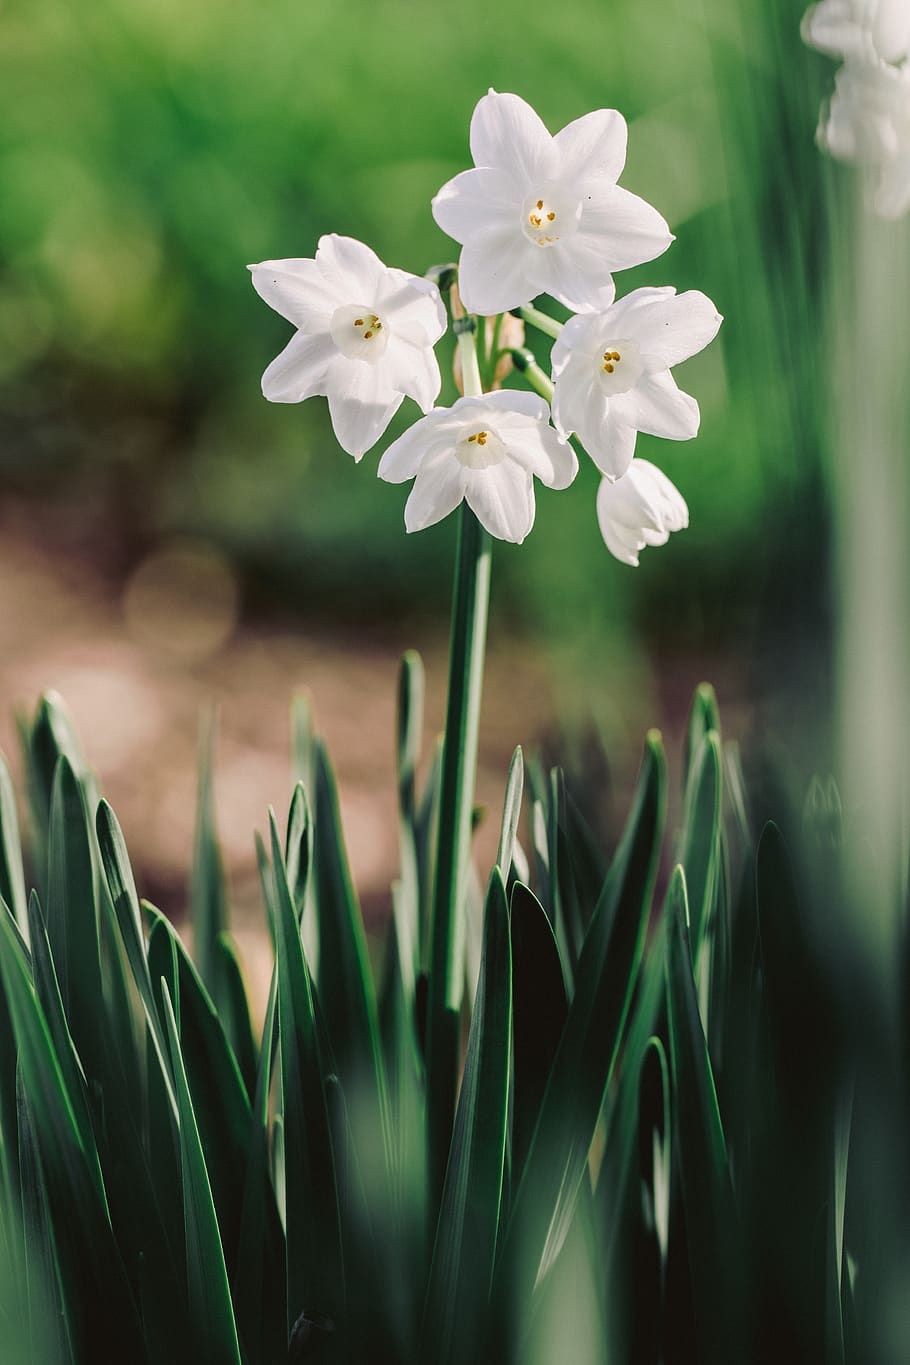 paperwhite daffodils in bloom close-up photography, flower, plant